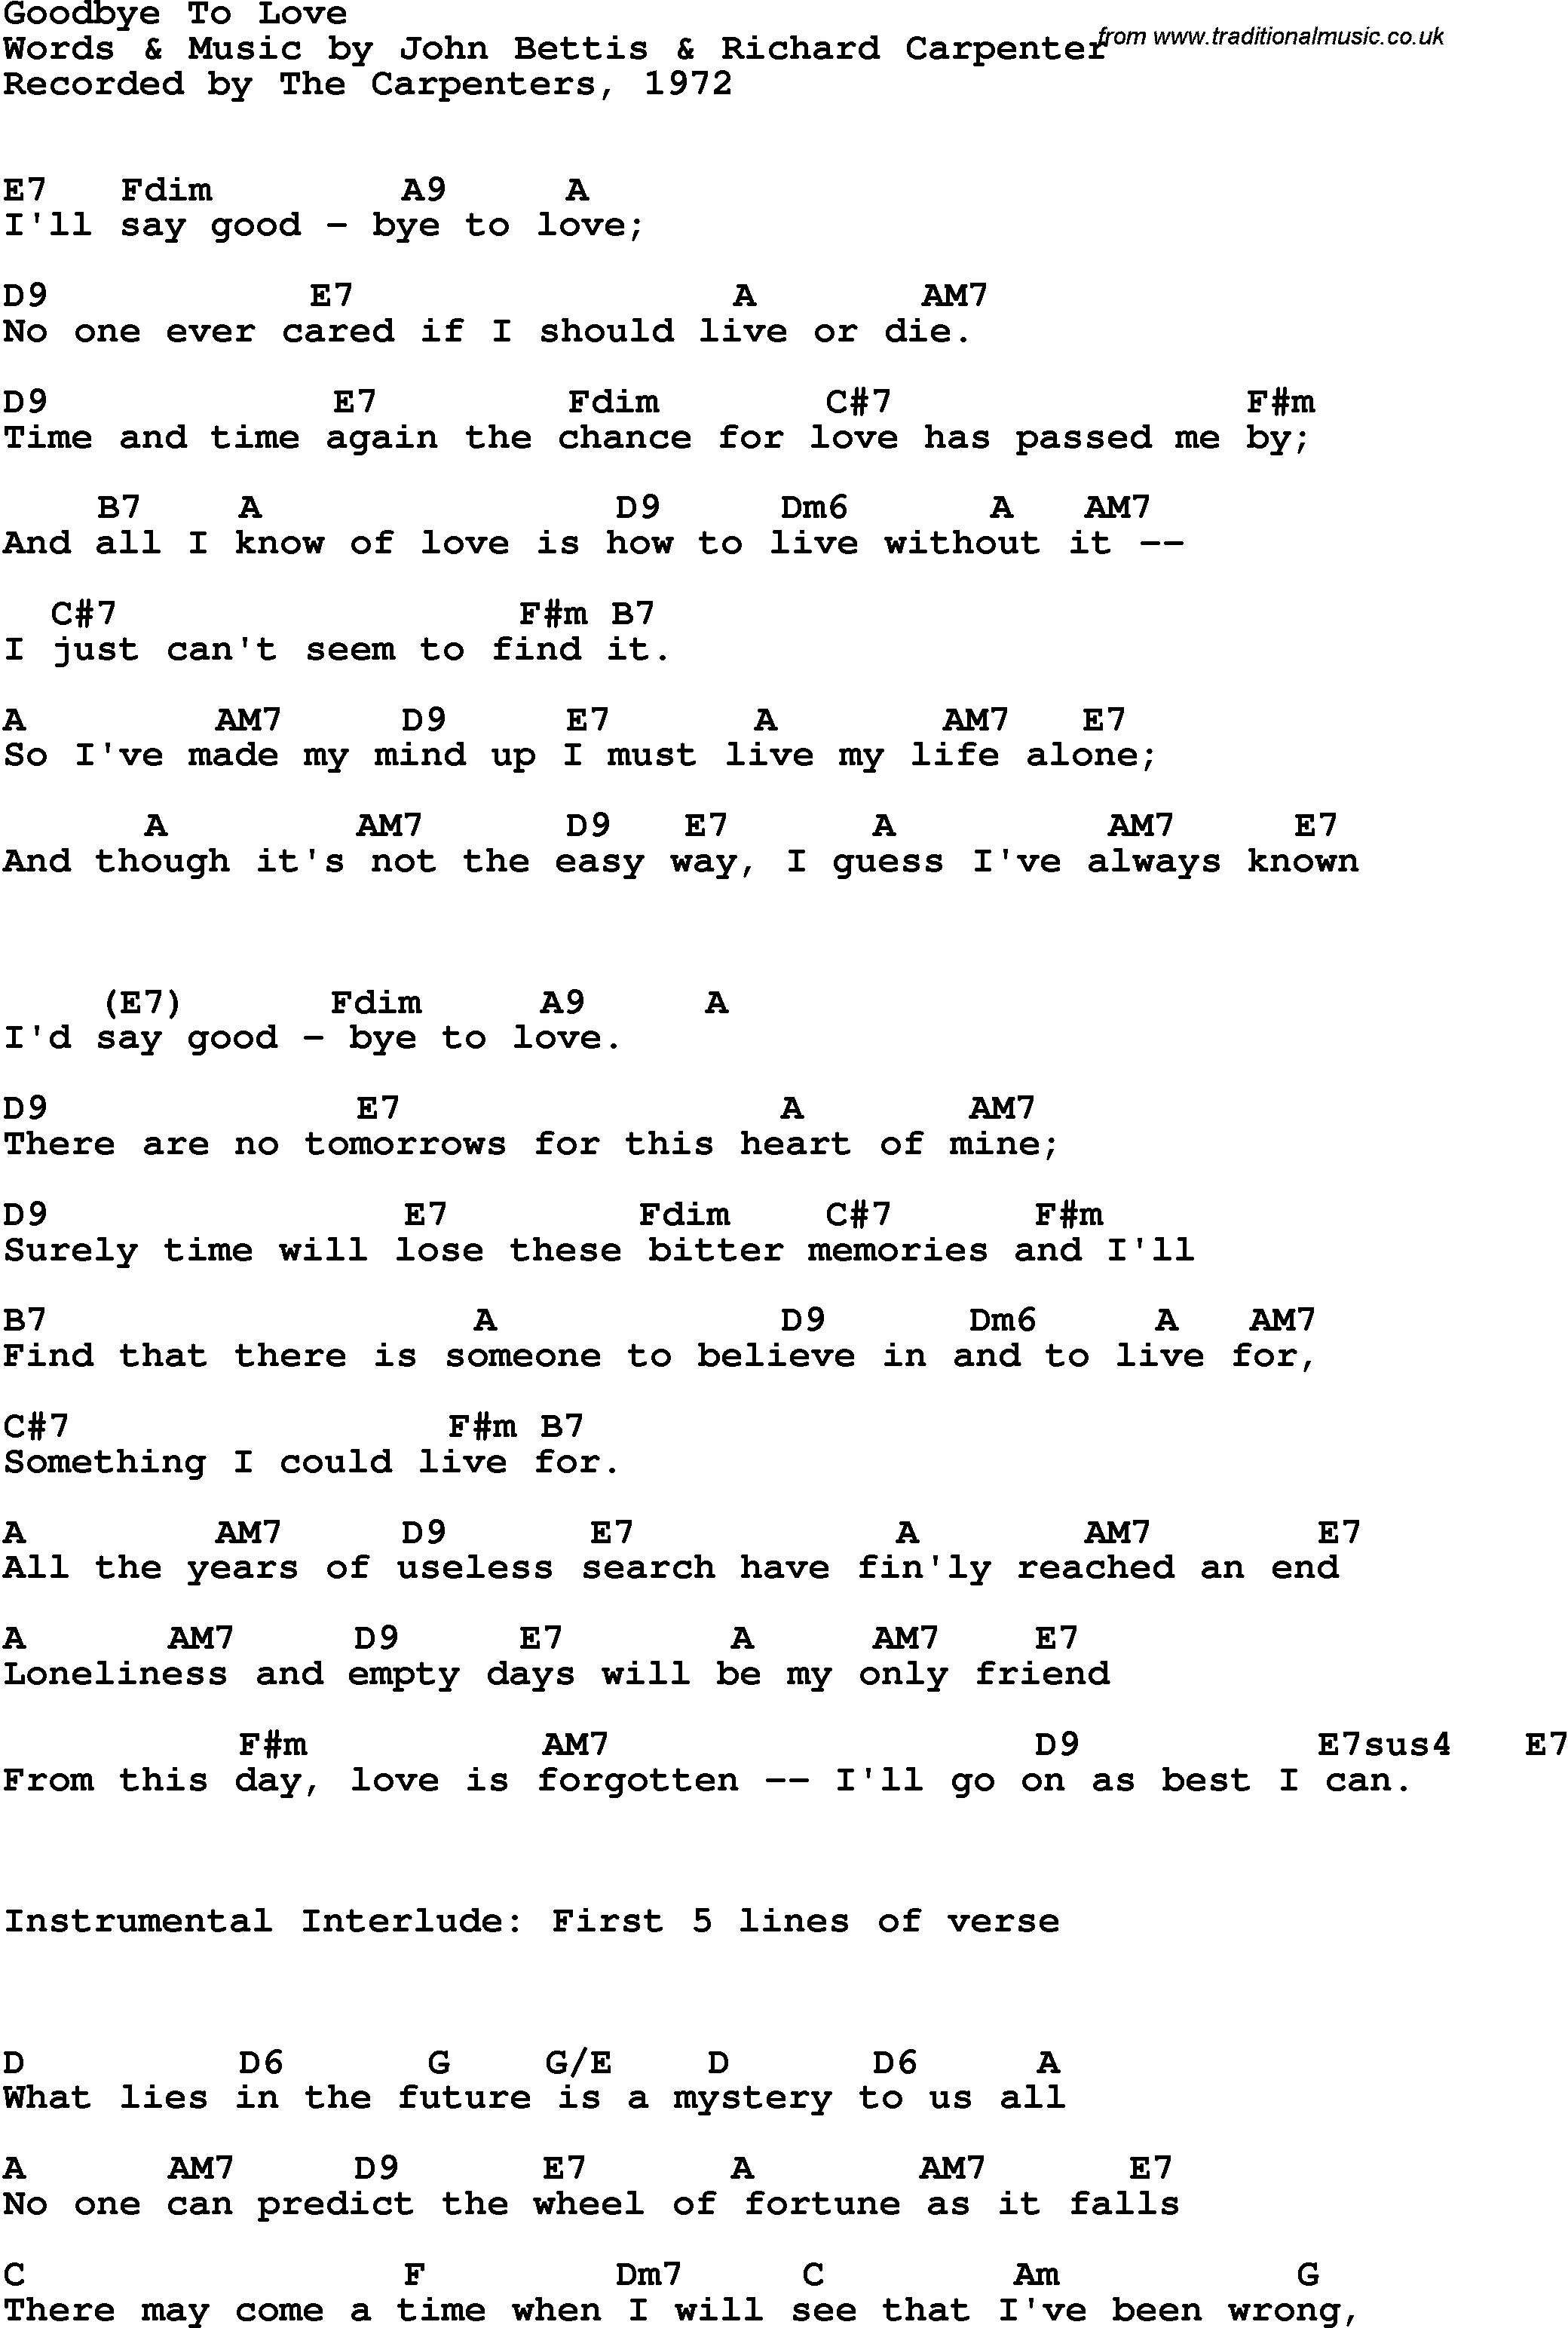 Song Lyrics with guitar chords for Goodbye To Love - The Carpenters, 1972